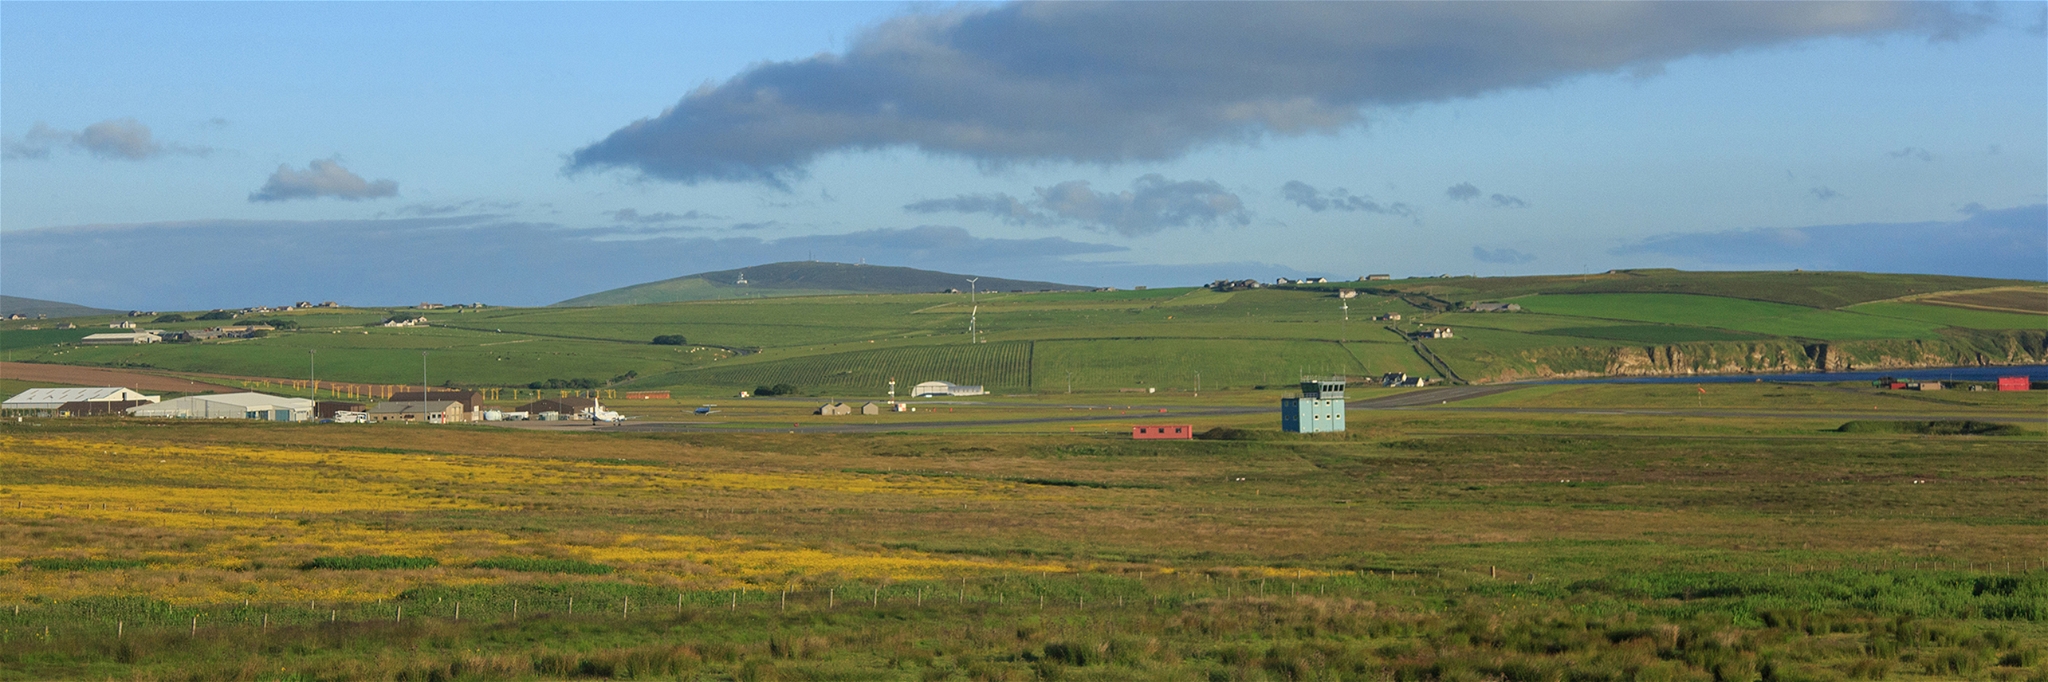 Kirkwall airport on Orkney, Scotland